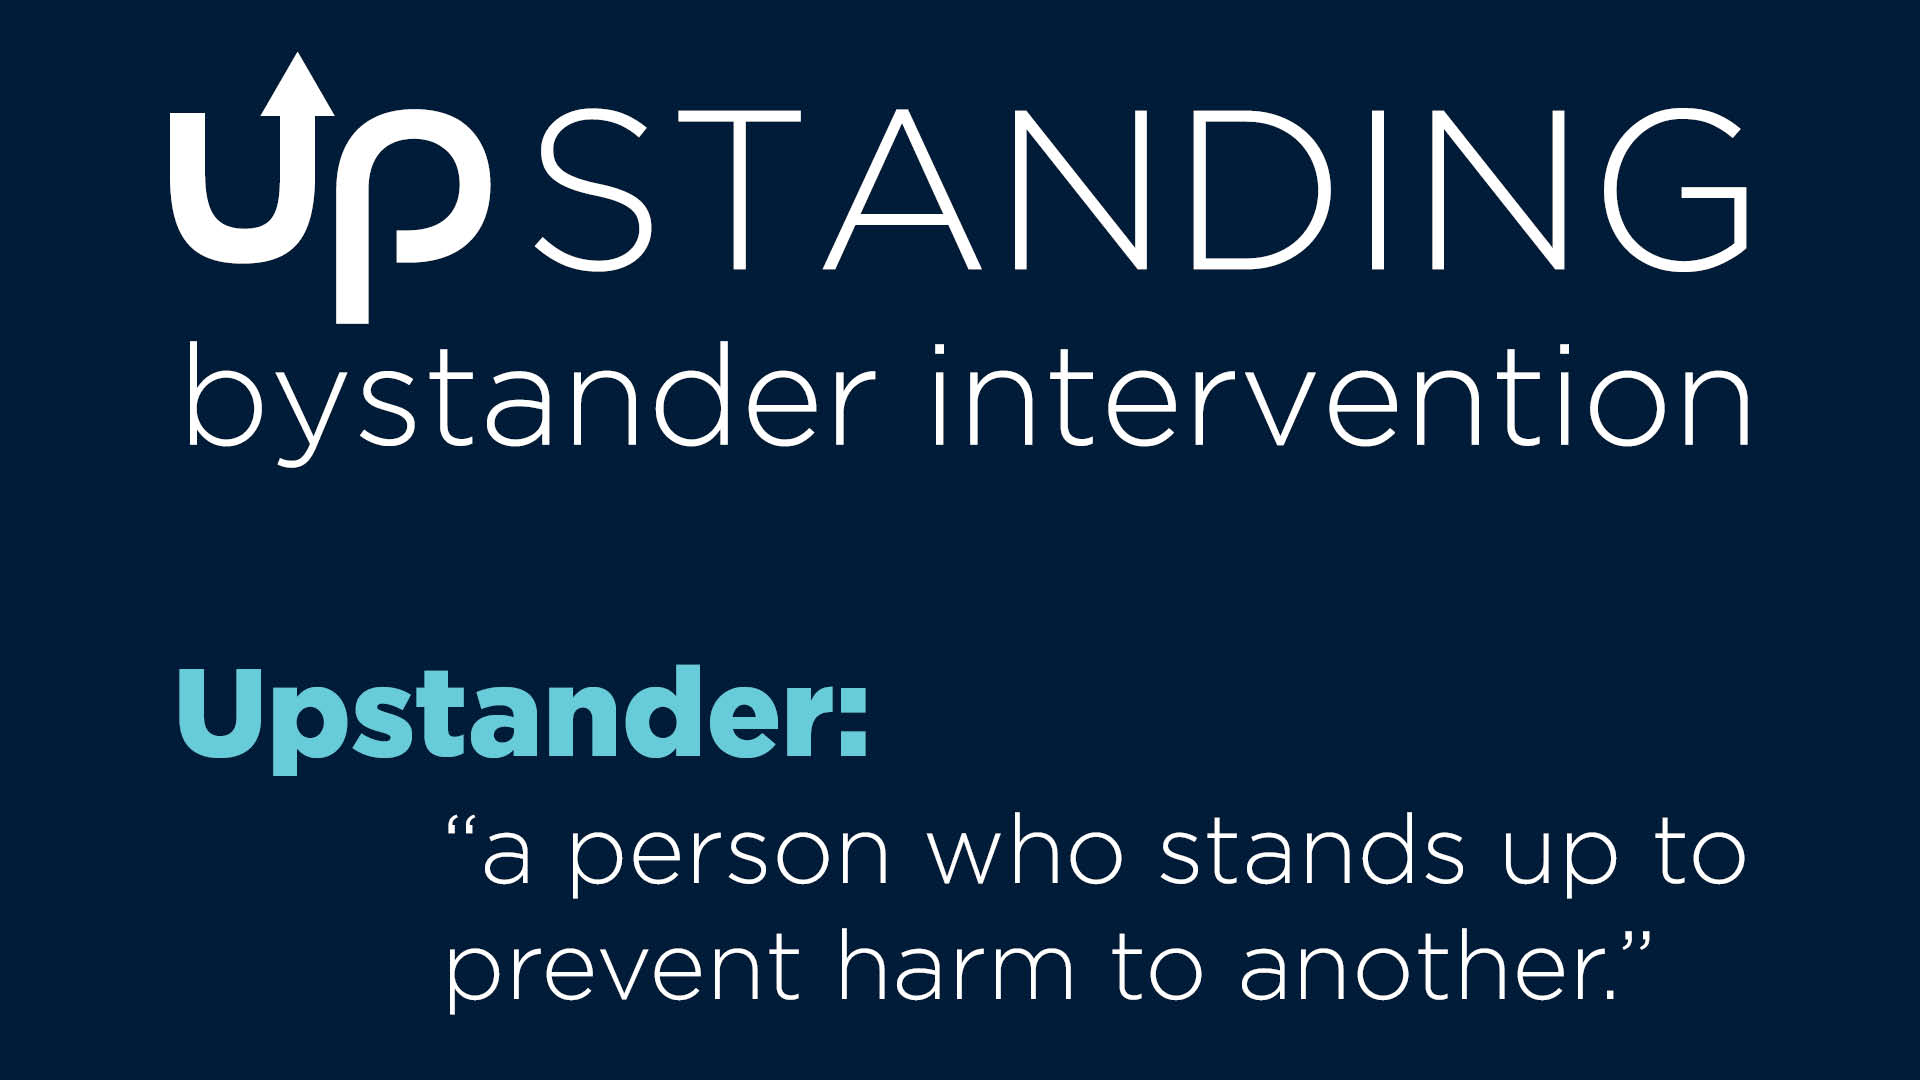 Upstanding bystander intervention. Upstander: a person who stands up to prevent harm to another.